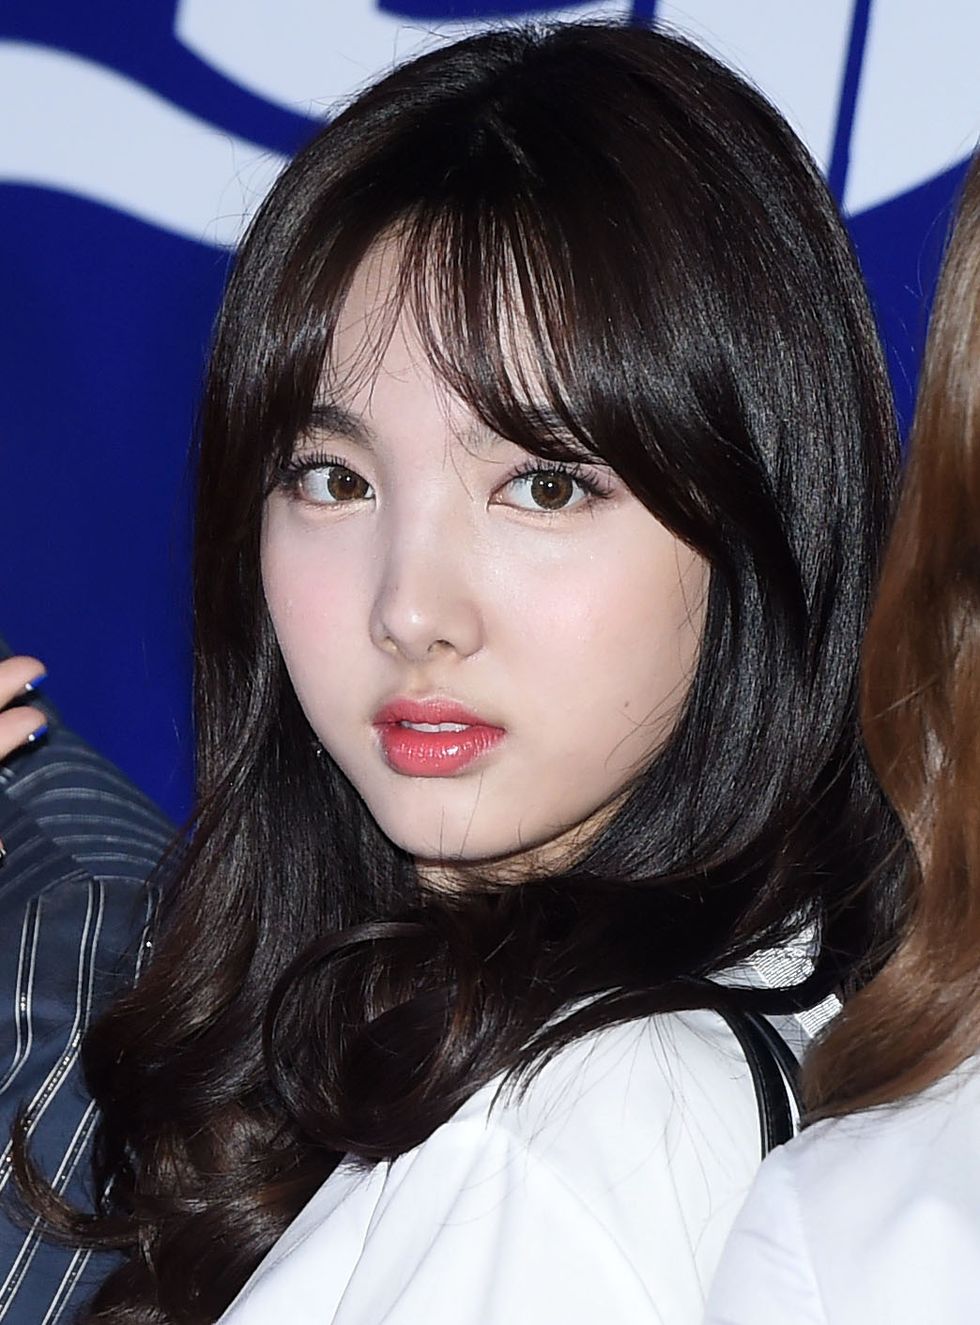 nayeon of twice attends the vip premiere of the movie detour on august 22, 2016 in seoul, south korea 2016 08 22